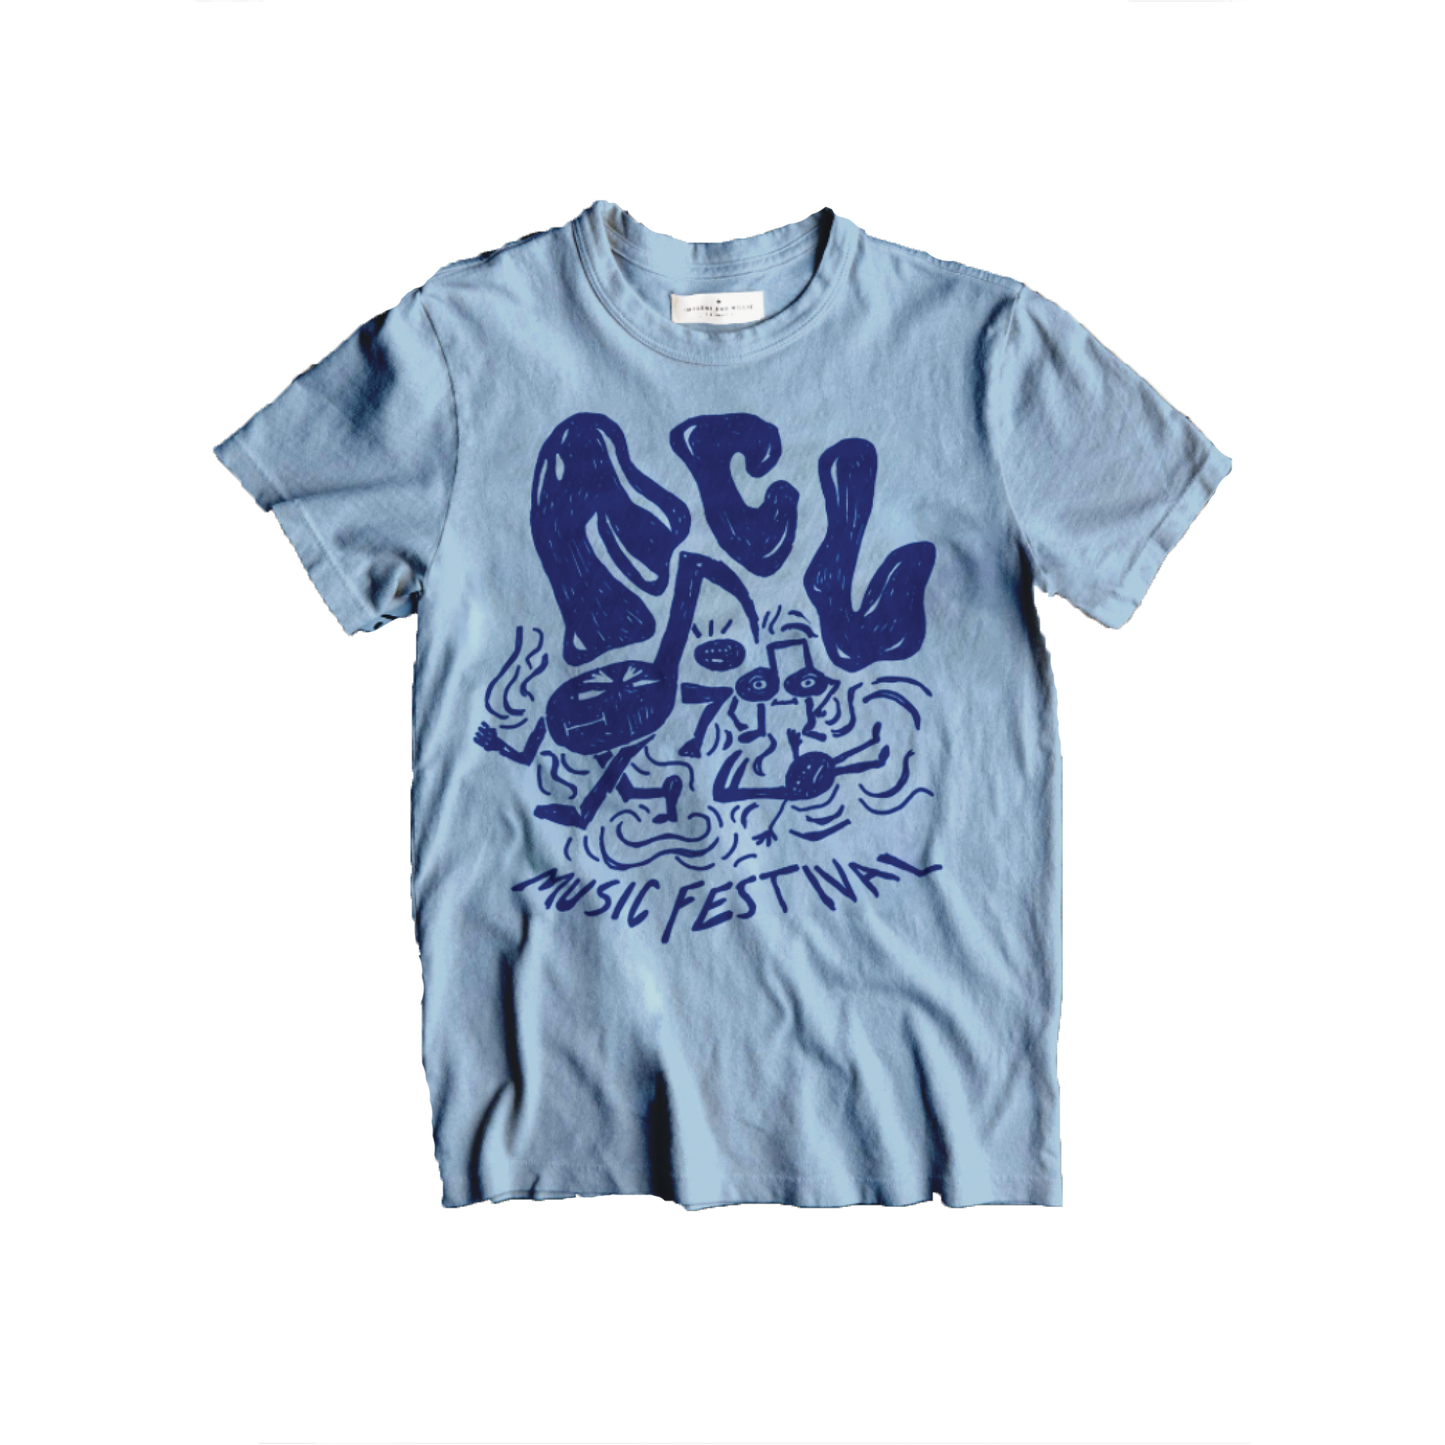 Imogene + Willie x ACL Music Notes Tee